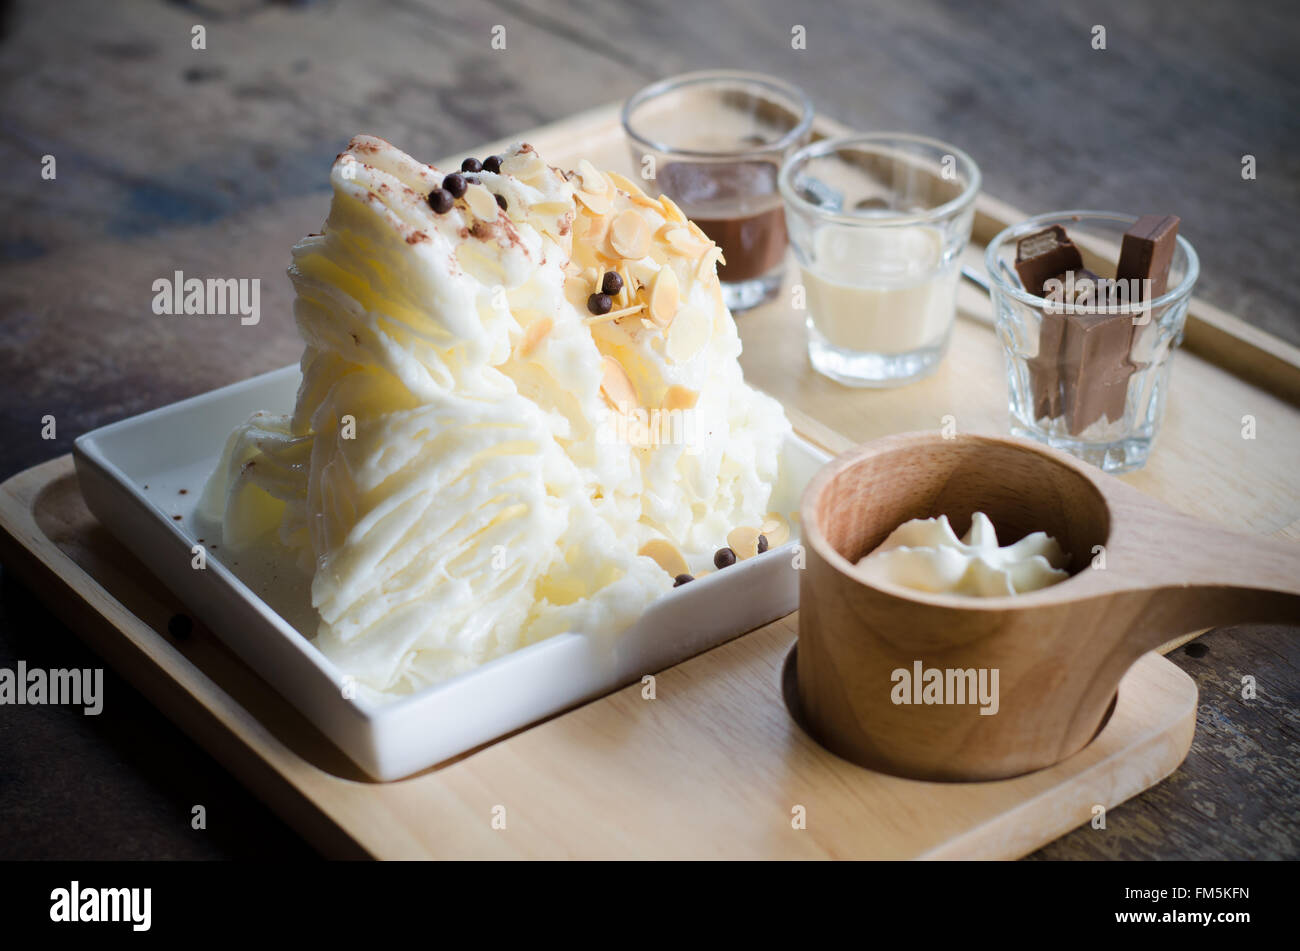 Ice frappe with milk flavored and almond(Chui hoah-Bing) Stock Photo